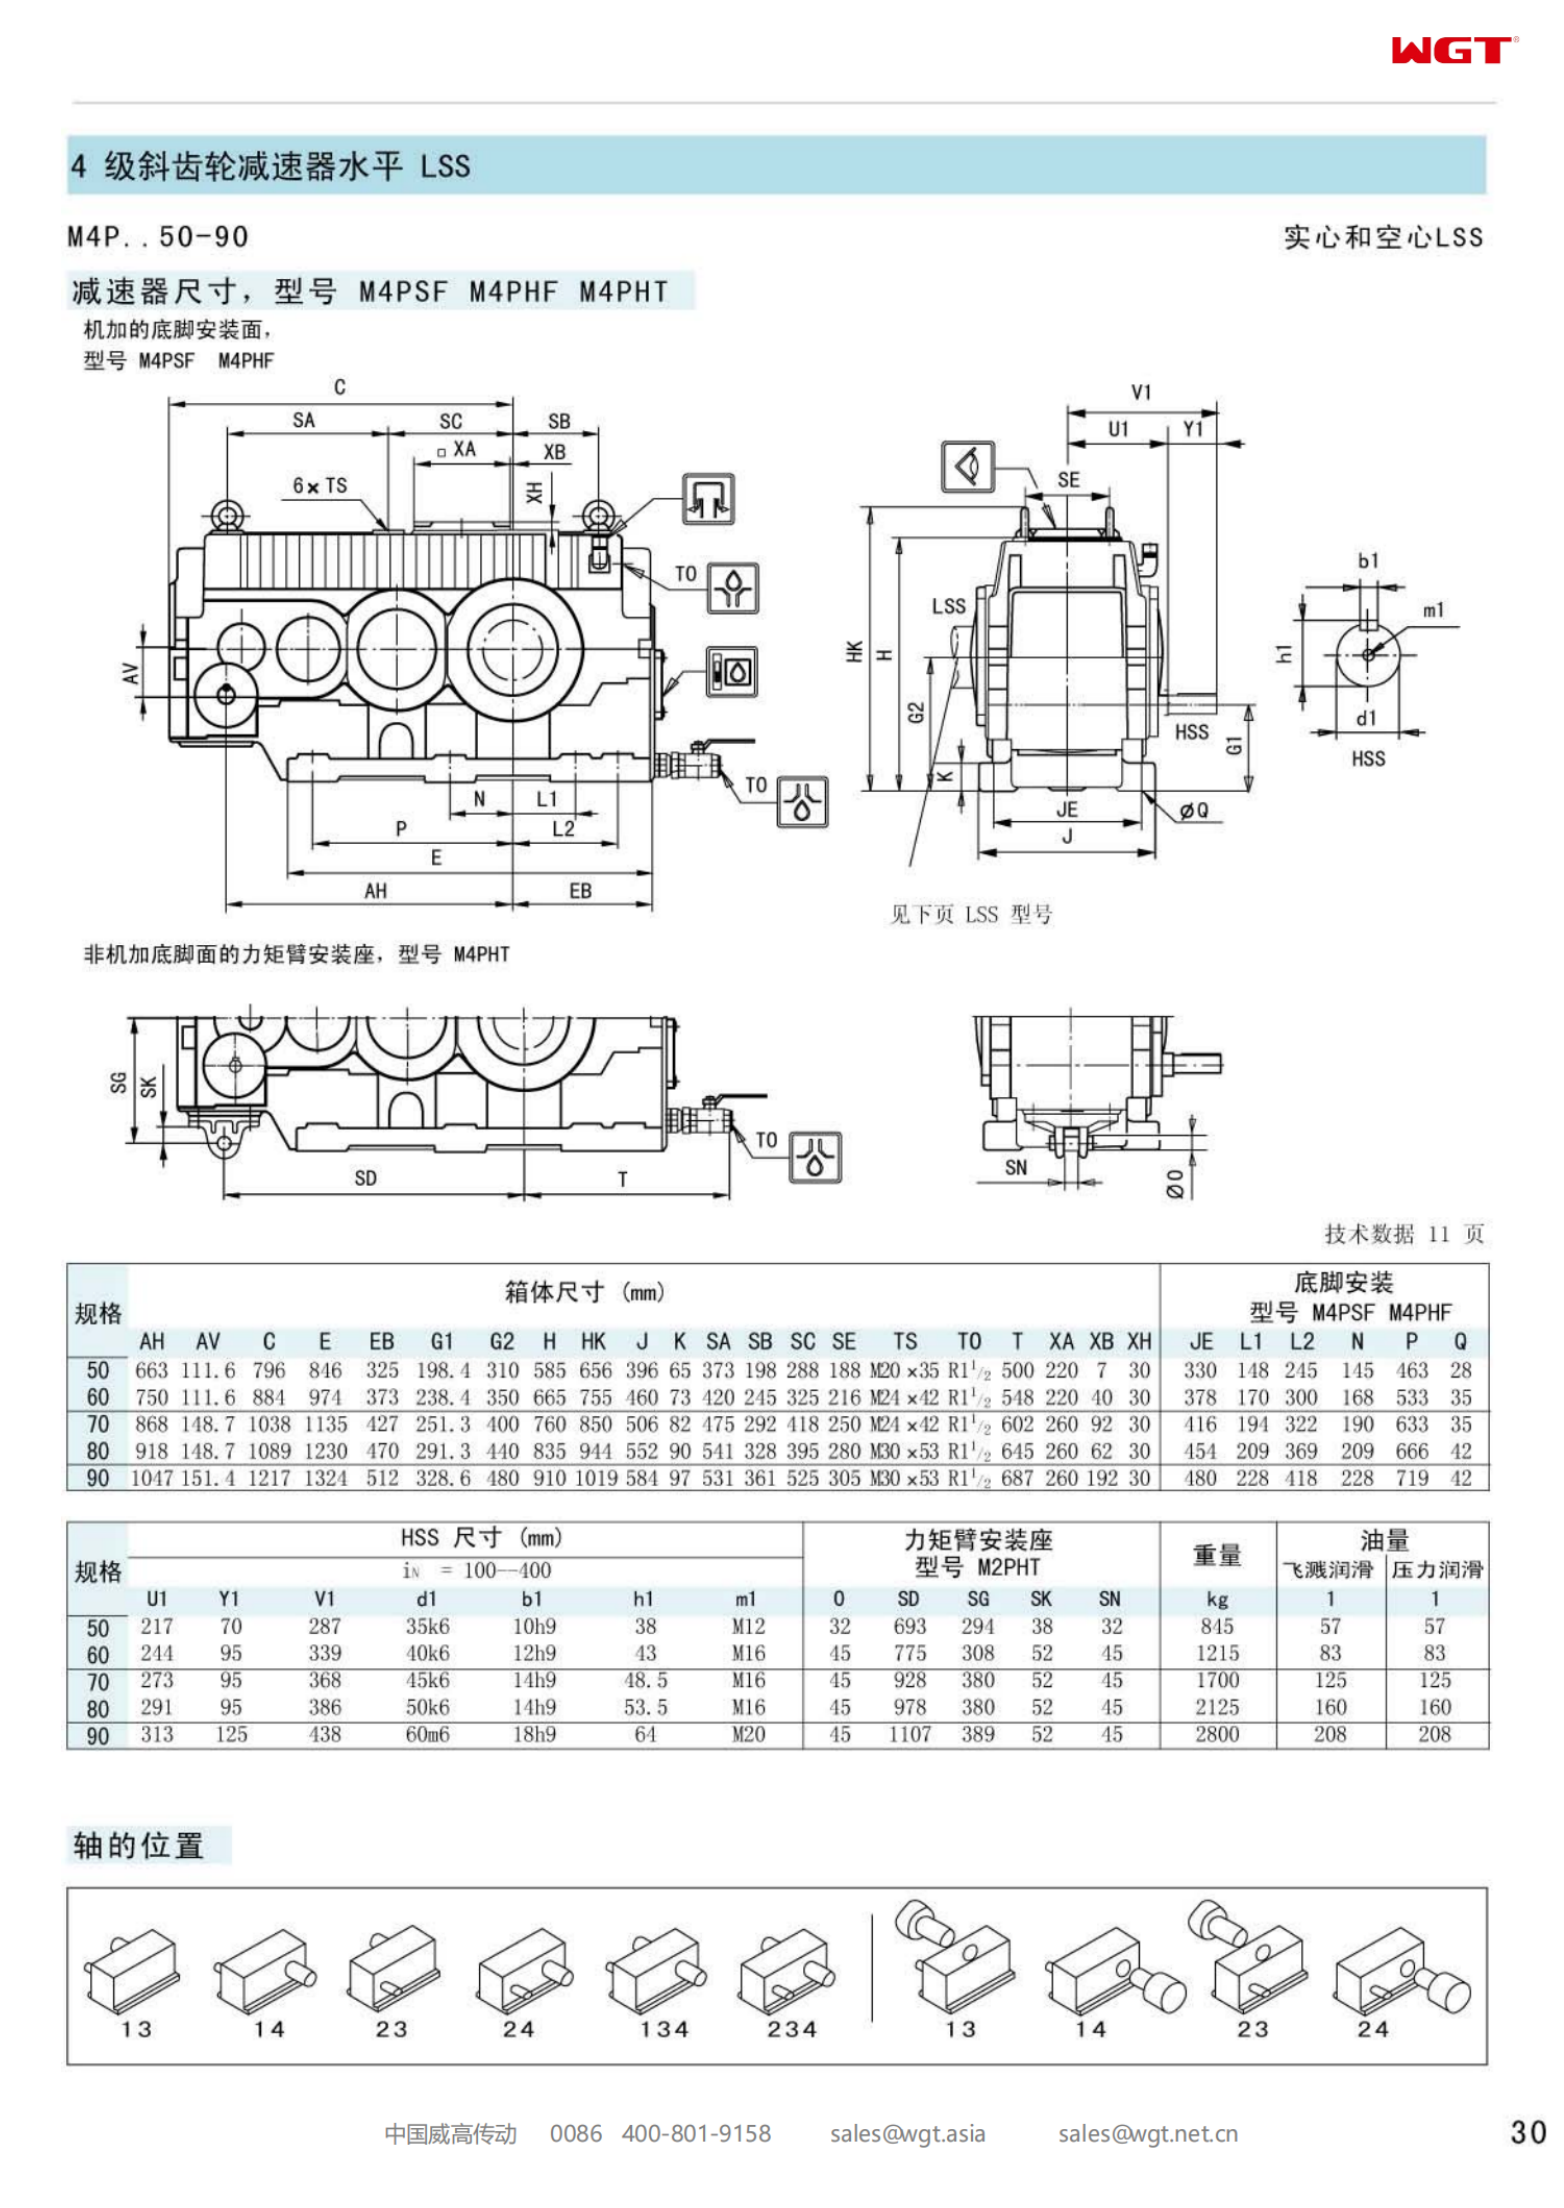 M4PHT70 Replace_SEW_M_Series Gearbox